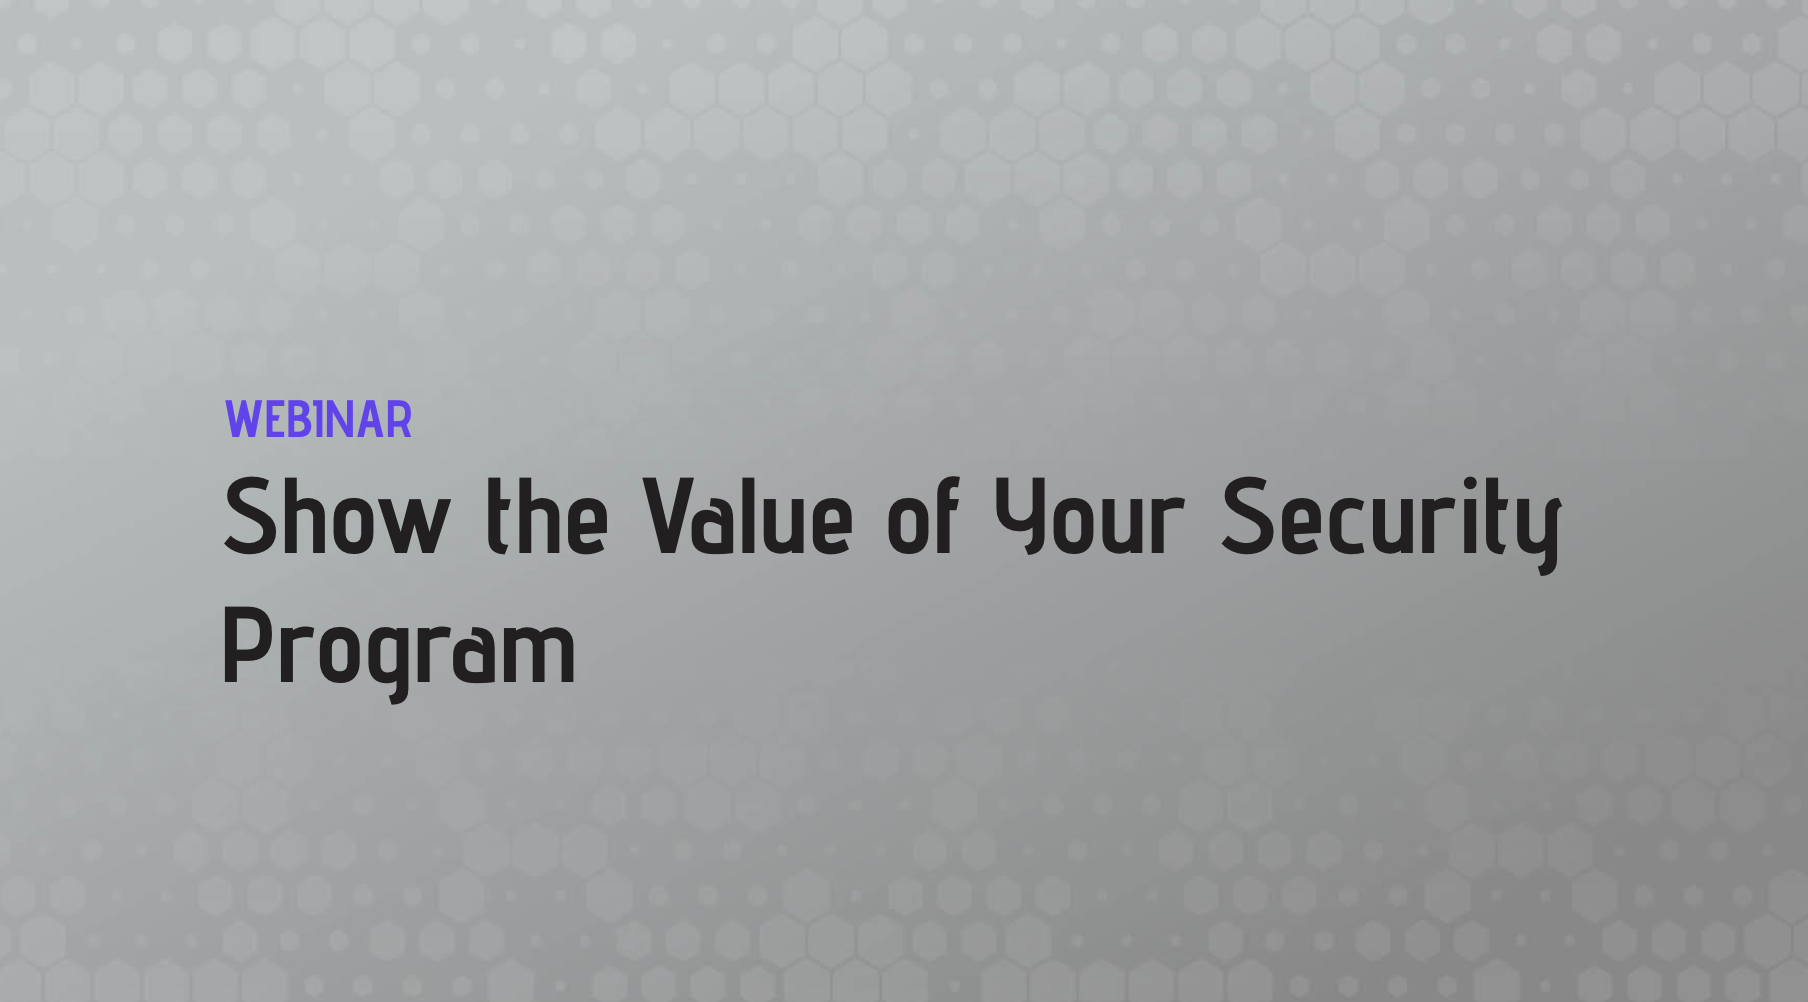 Show the Value of Your Security Program